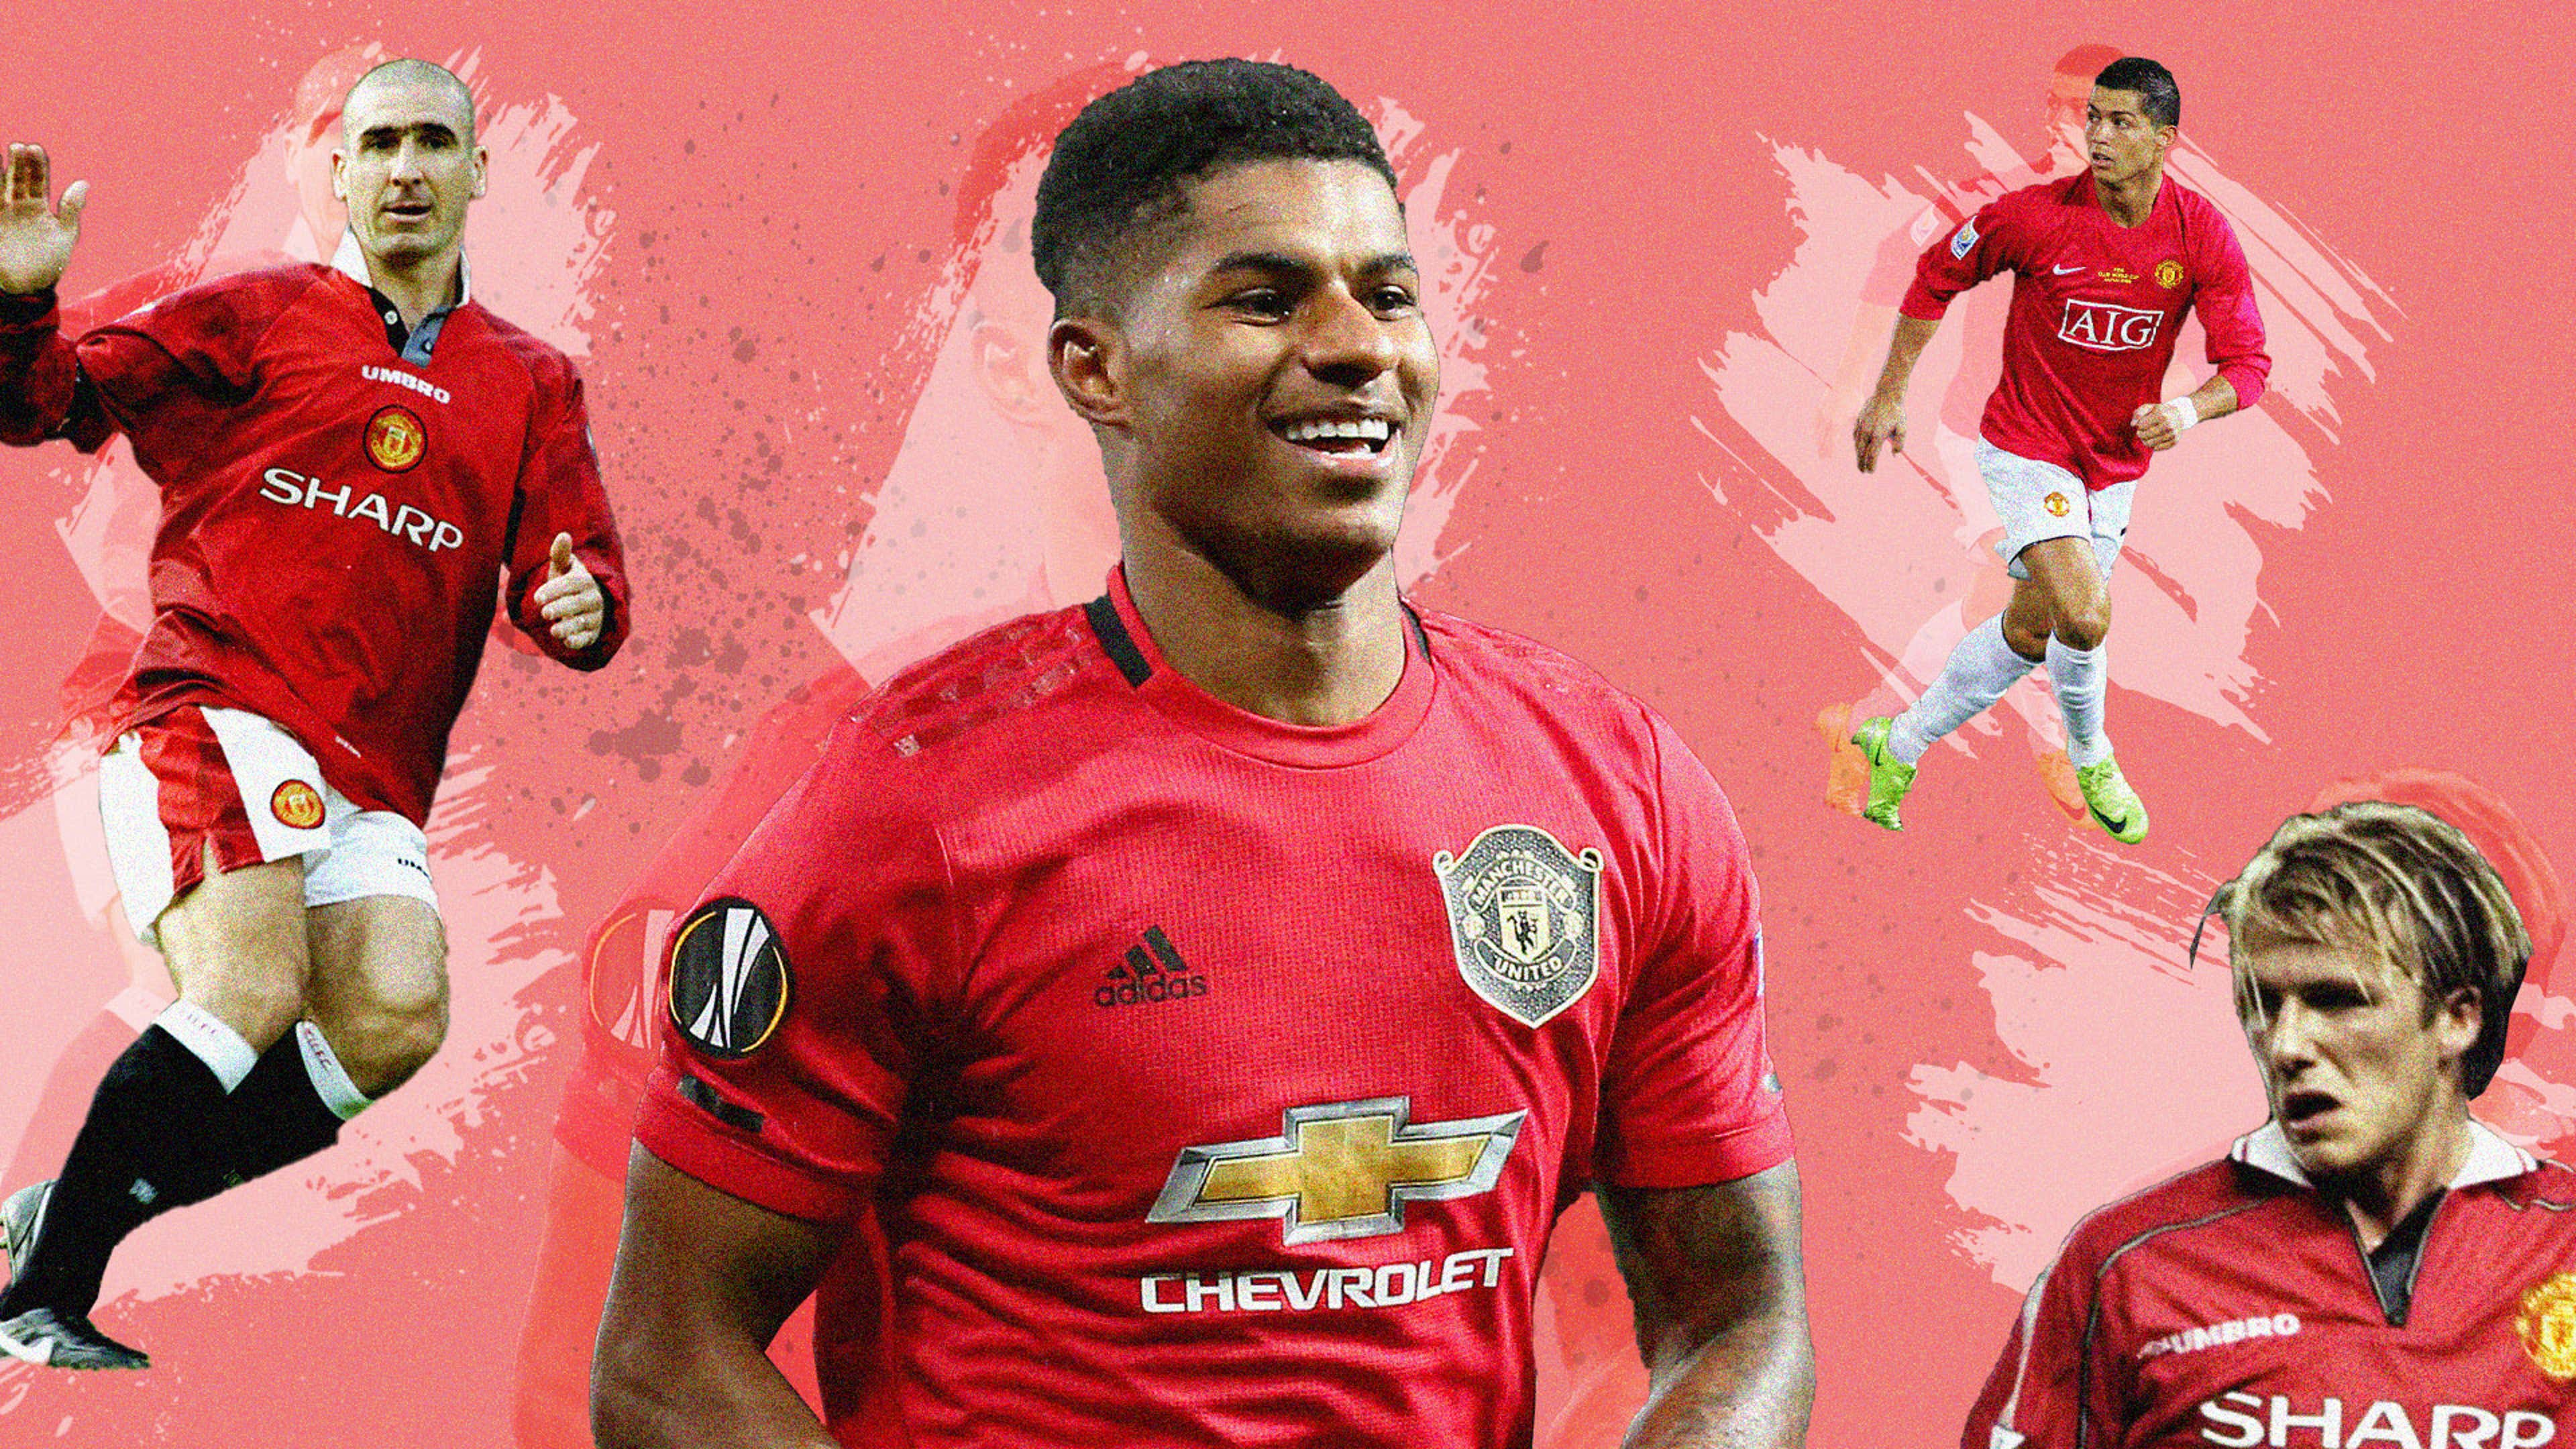 Manchester united home kits ranked